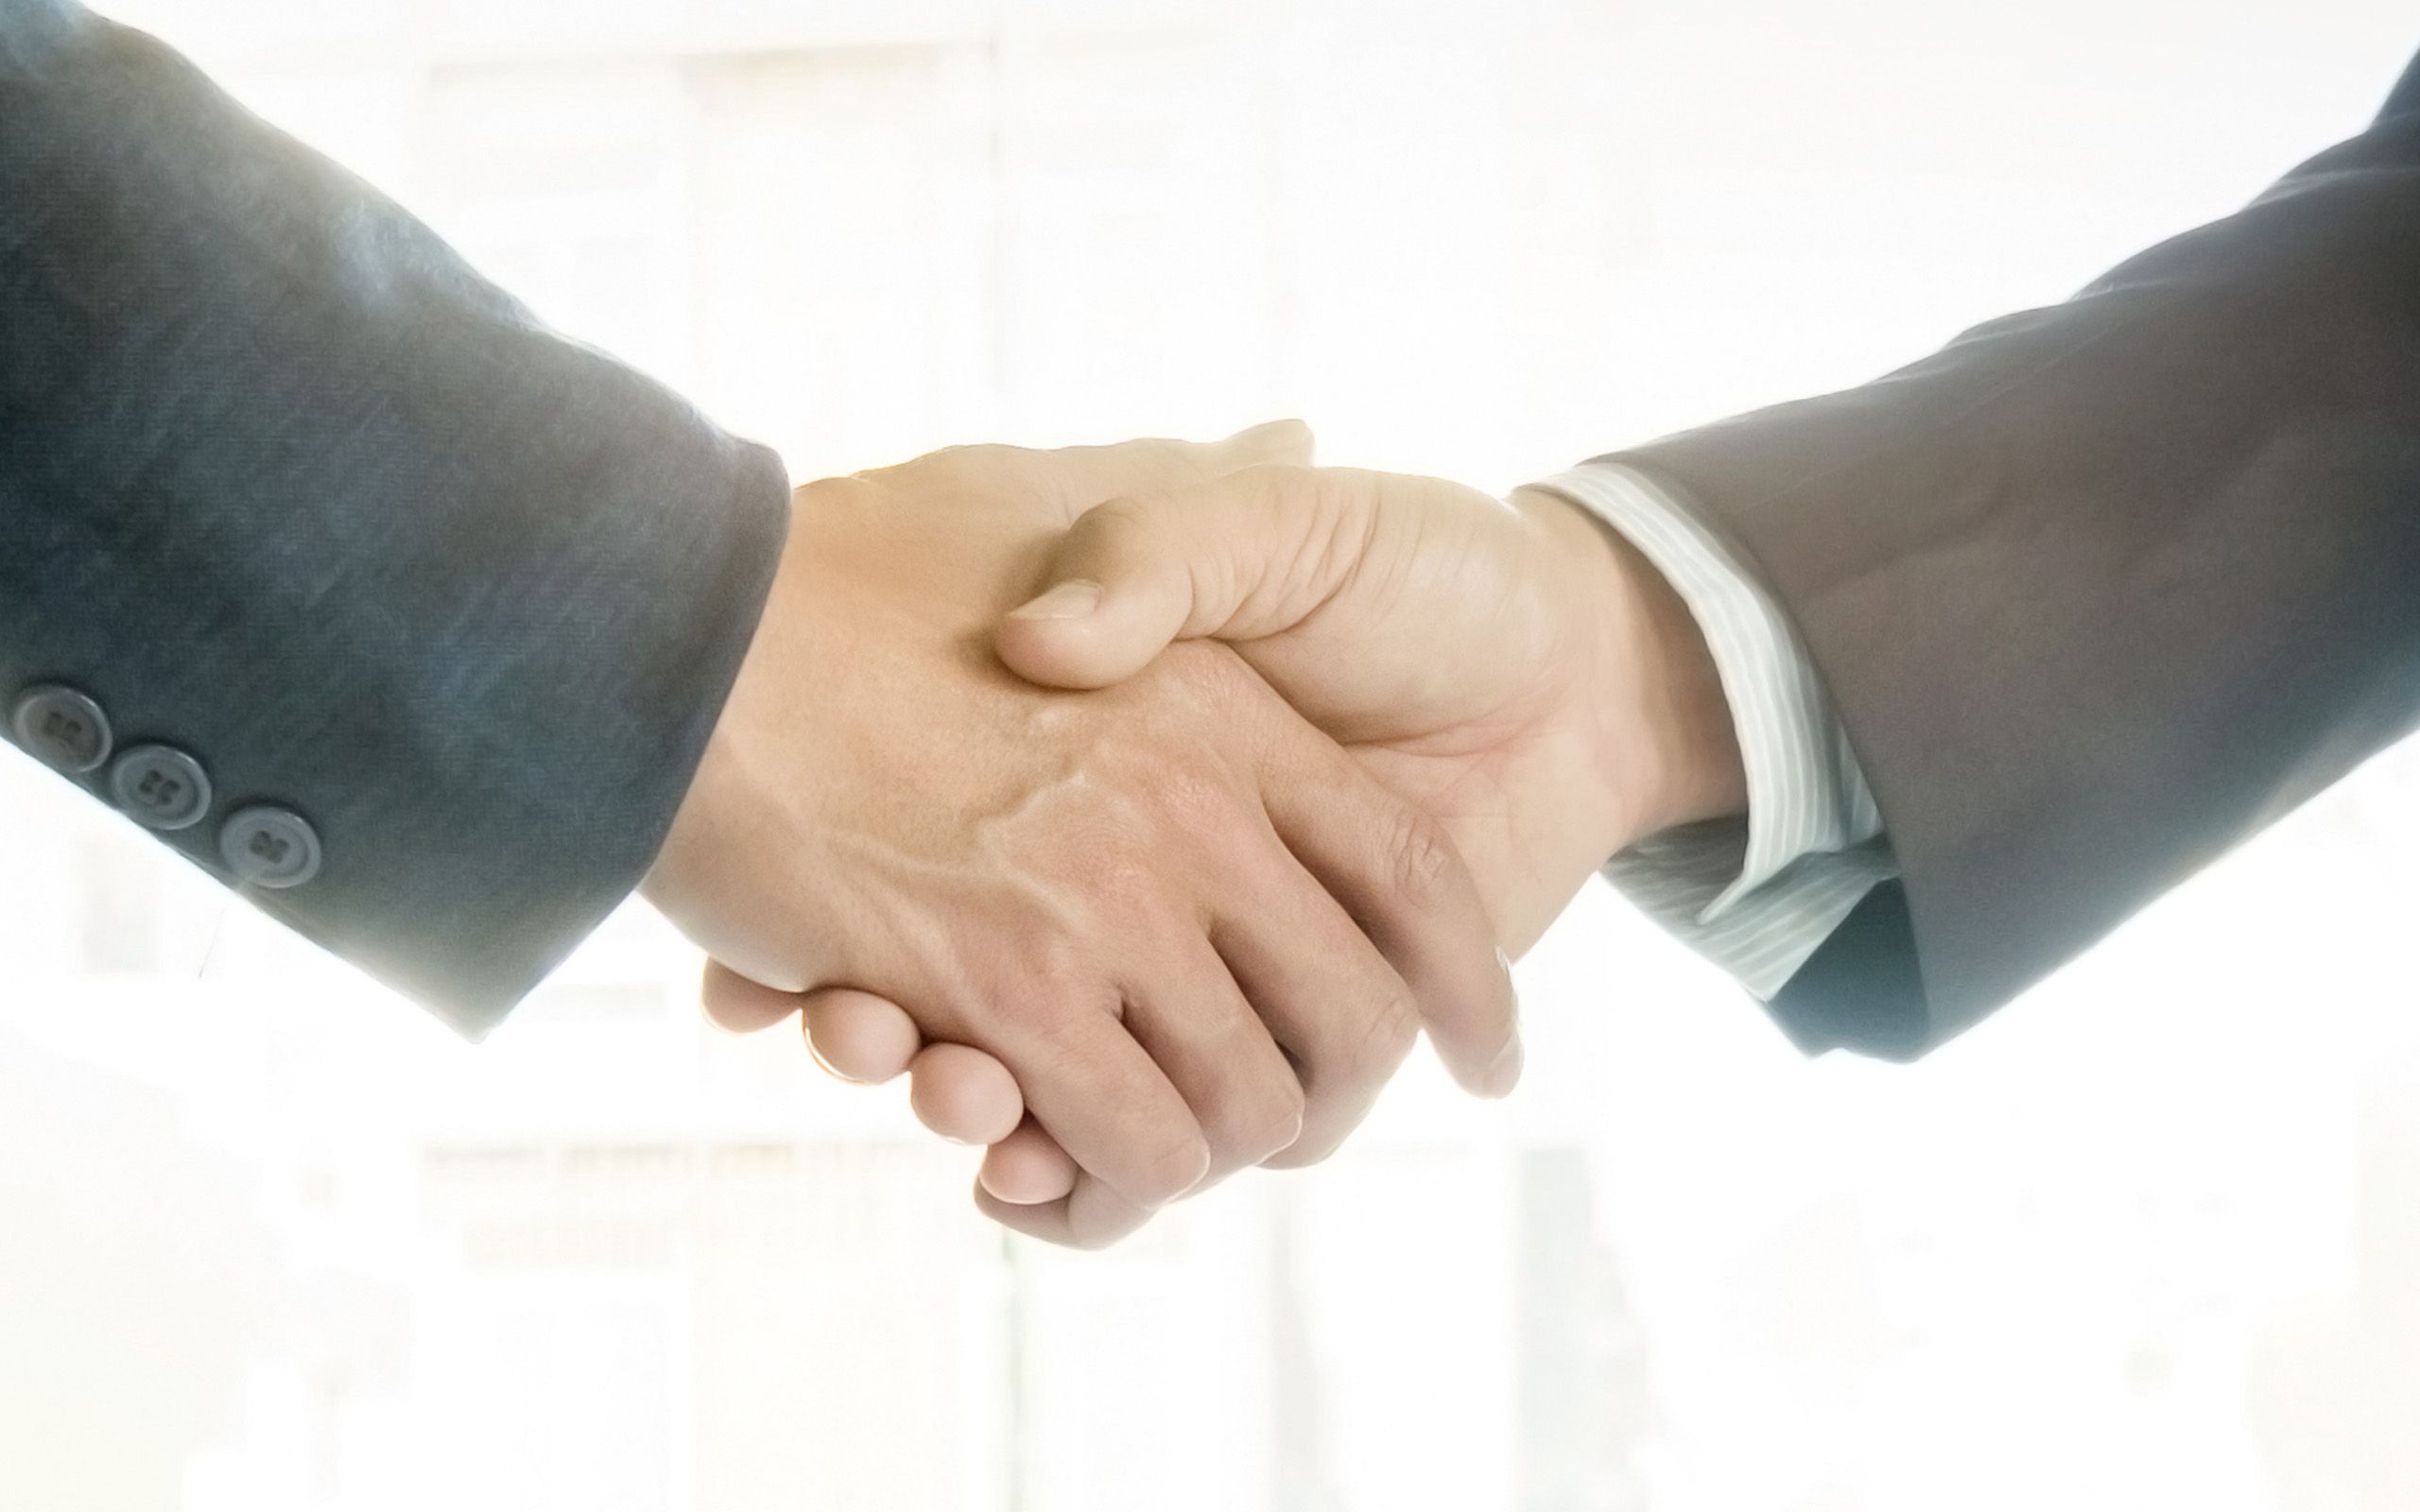 Download wallpaper handshake, two businessmen, business concepts, deal conclusion concepts, business people, handshake concepts for desktop with resolution 2560x1600. High Quality HD picture wallpaper